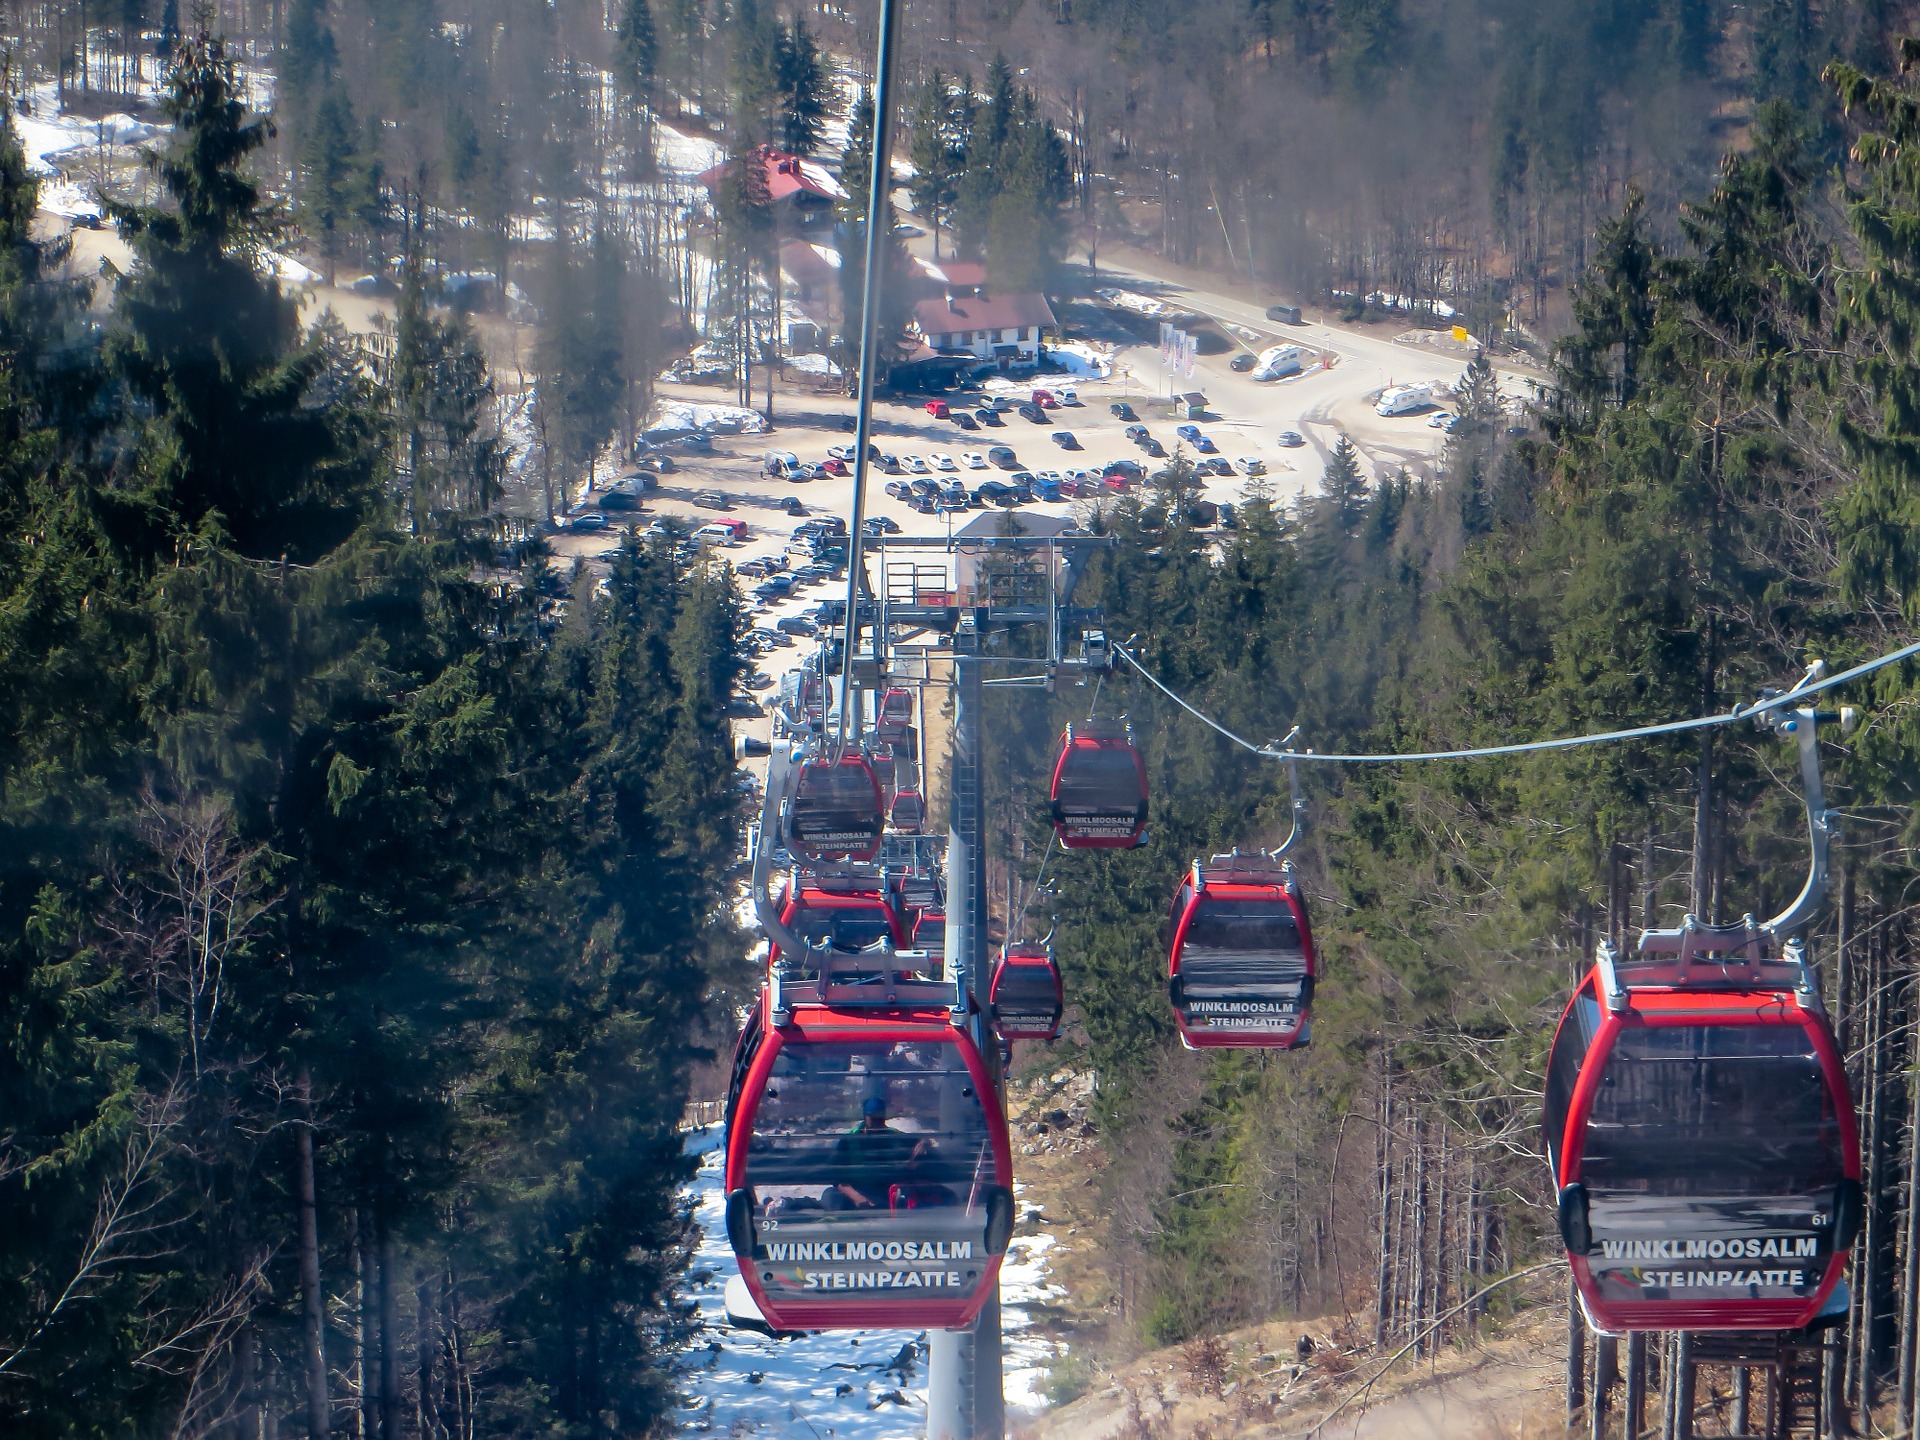 Cable cars photo